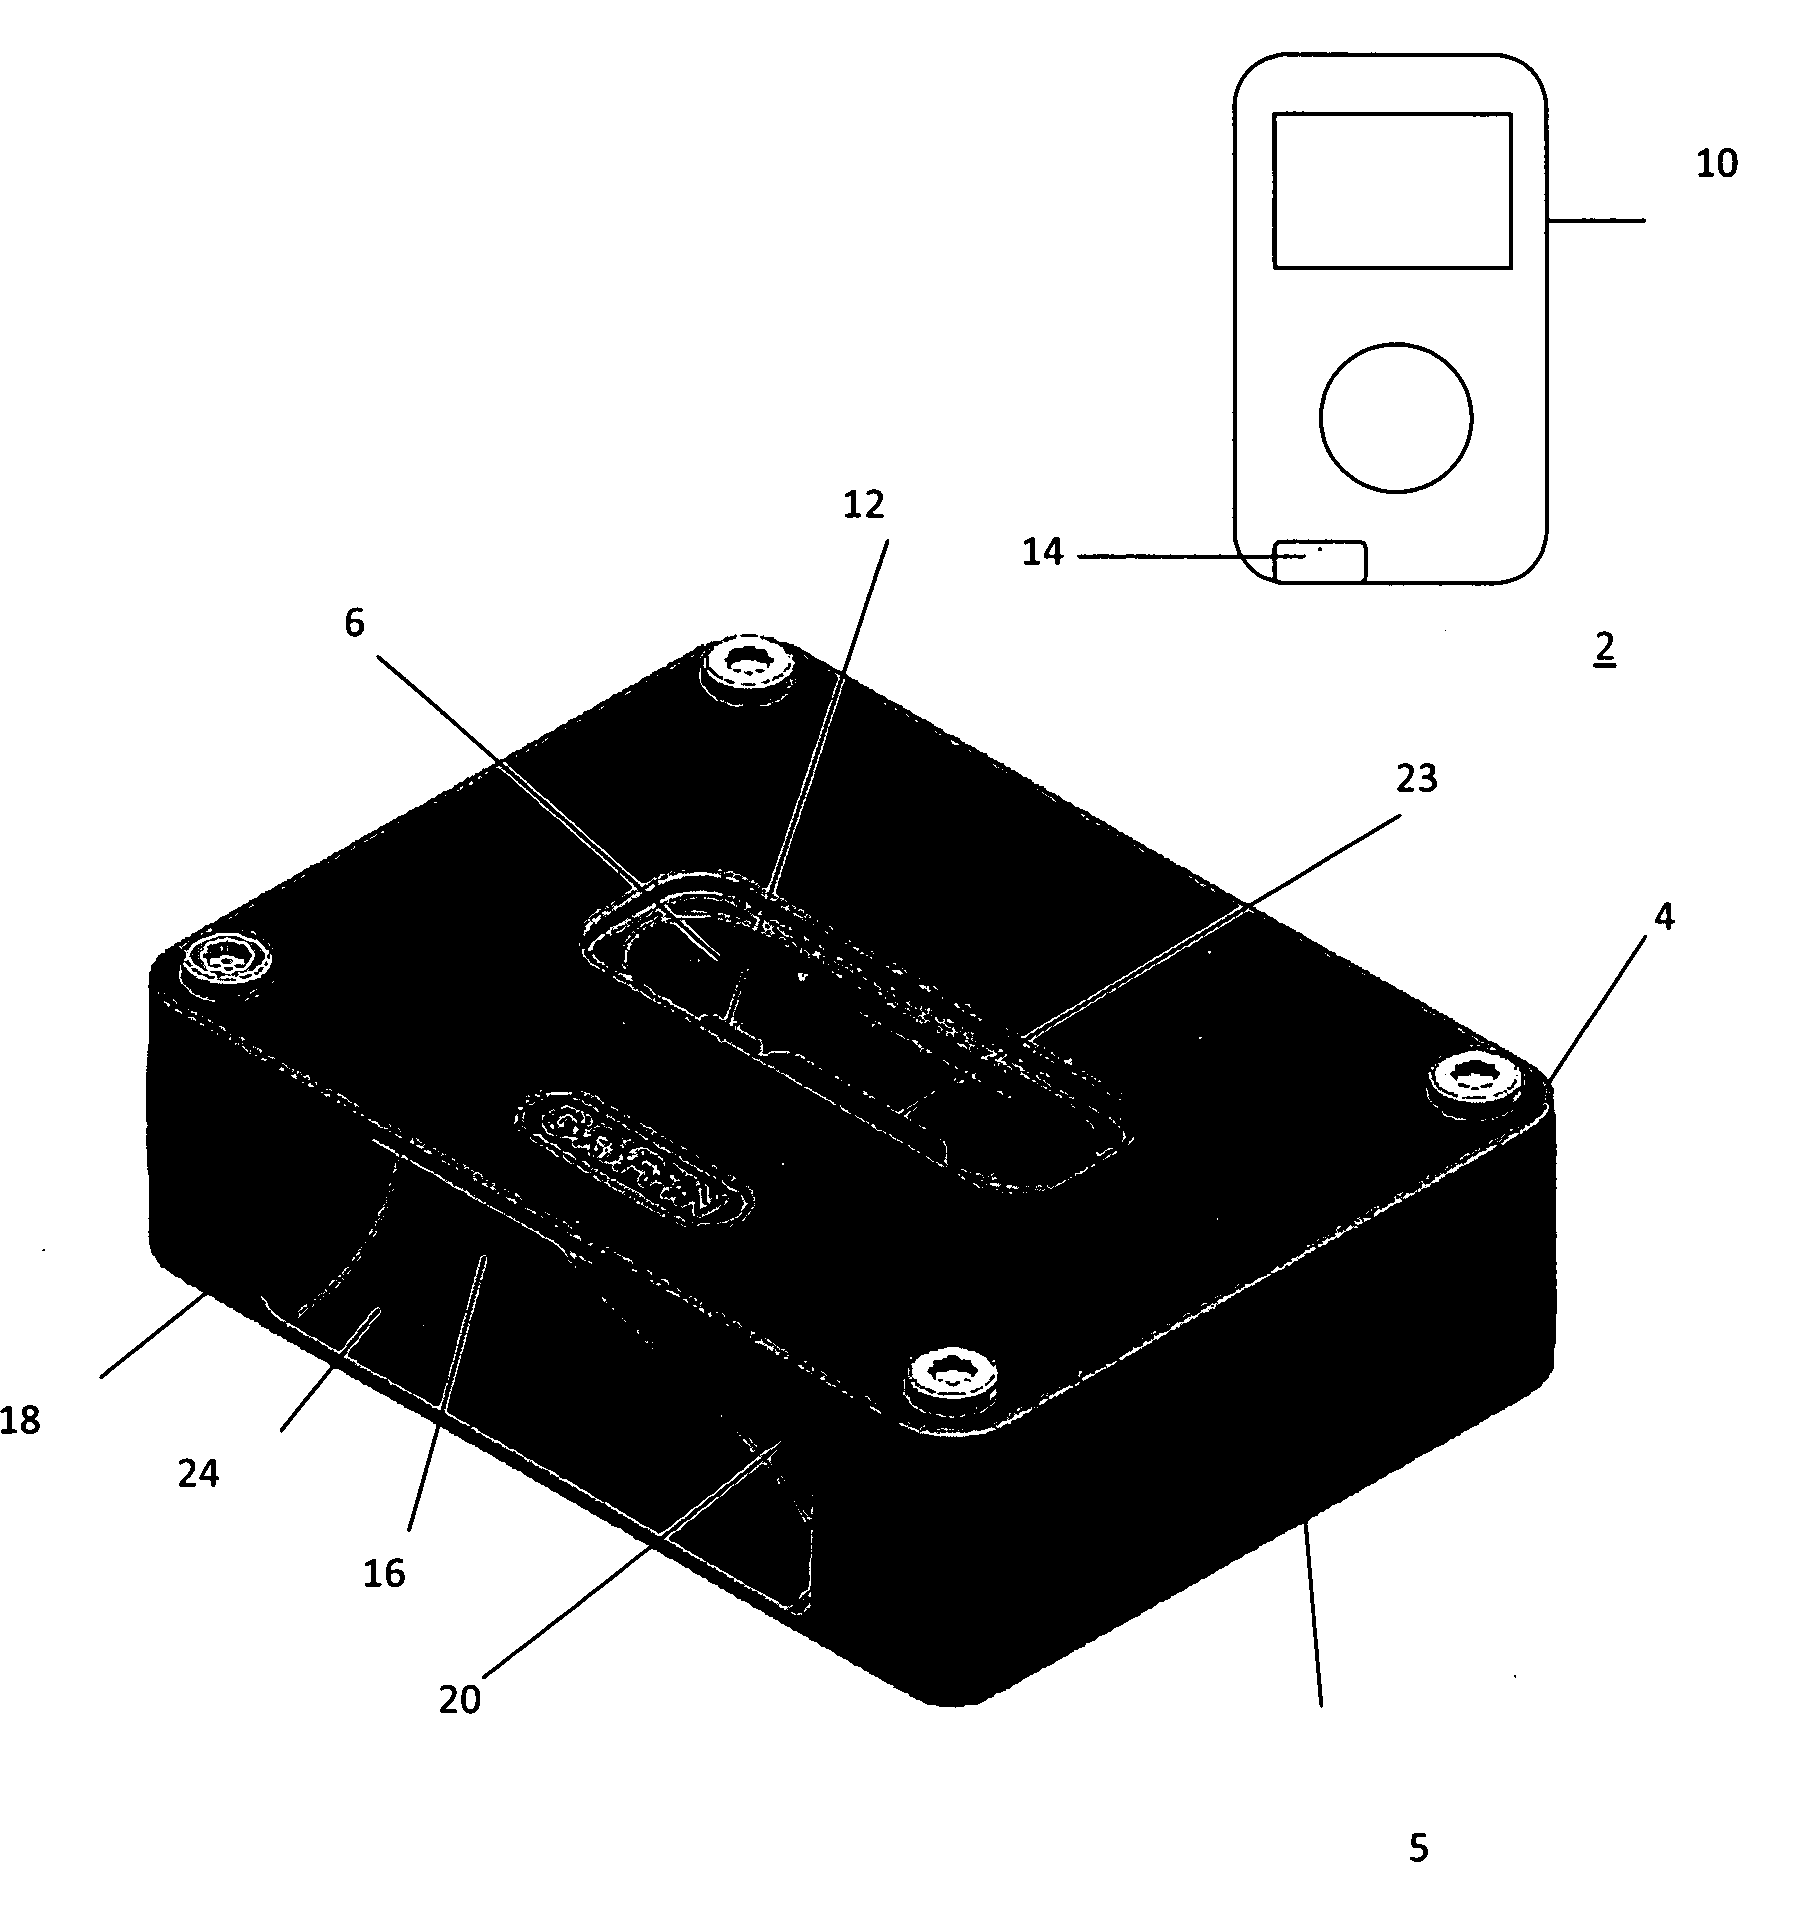 Acoustic Dock for Portable Electronic Device